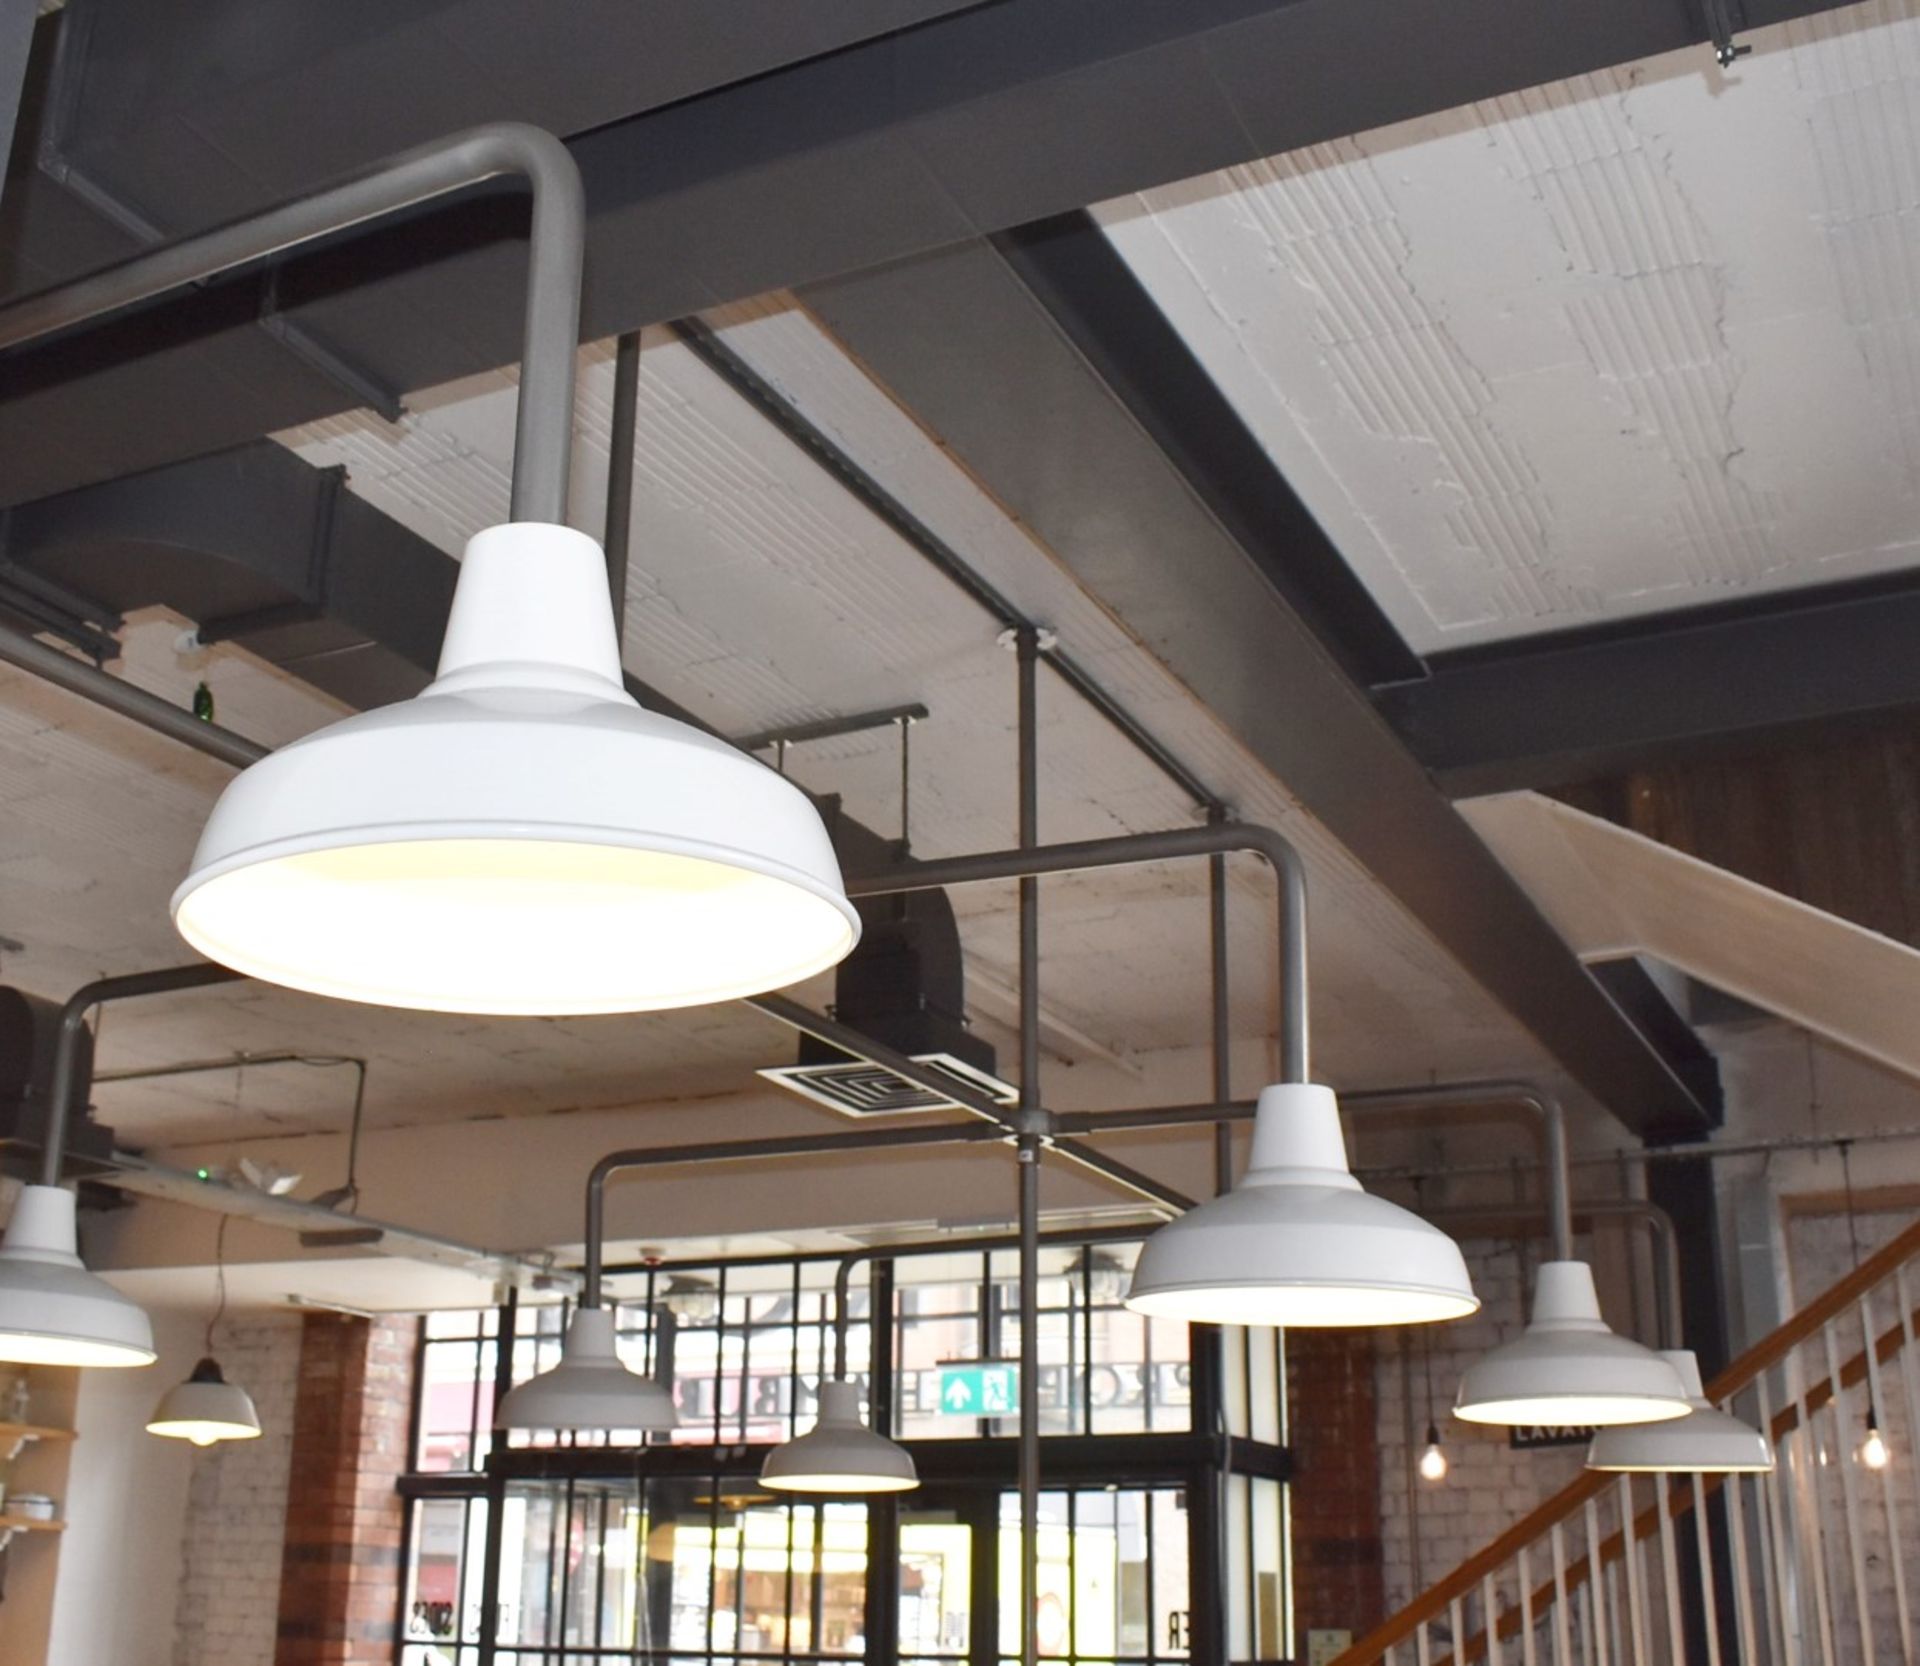 12 x Cream Light Pendants With Large Selection of Industrial Piping For Overseat Lighting - Image 5 of 9